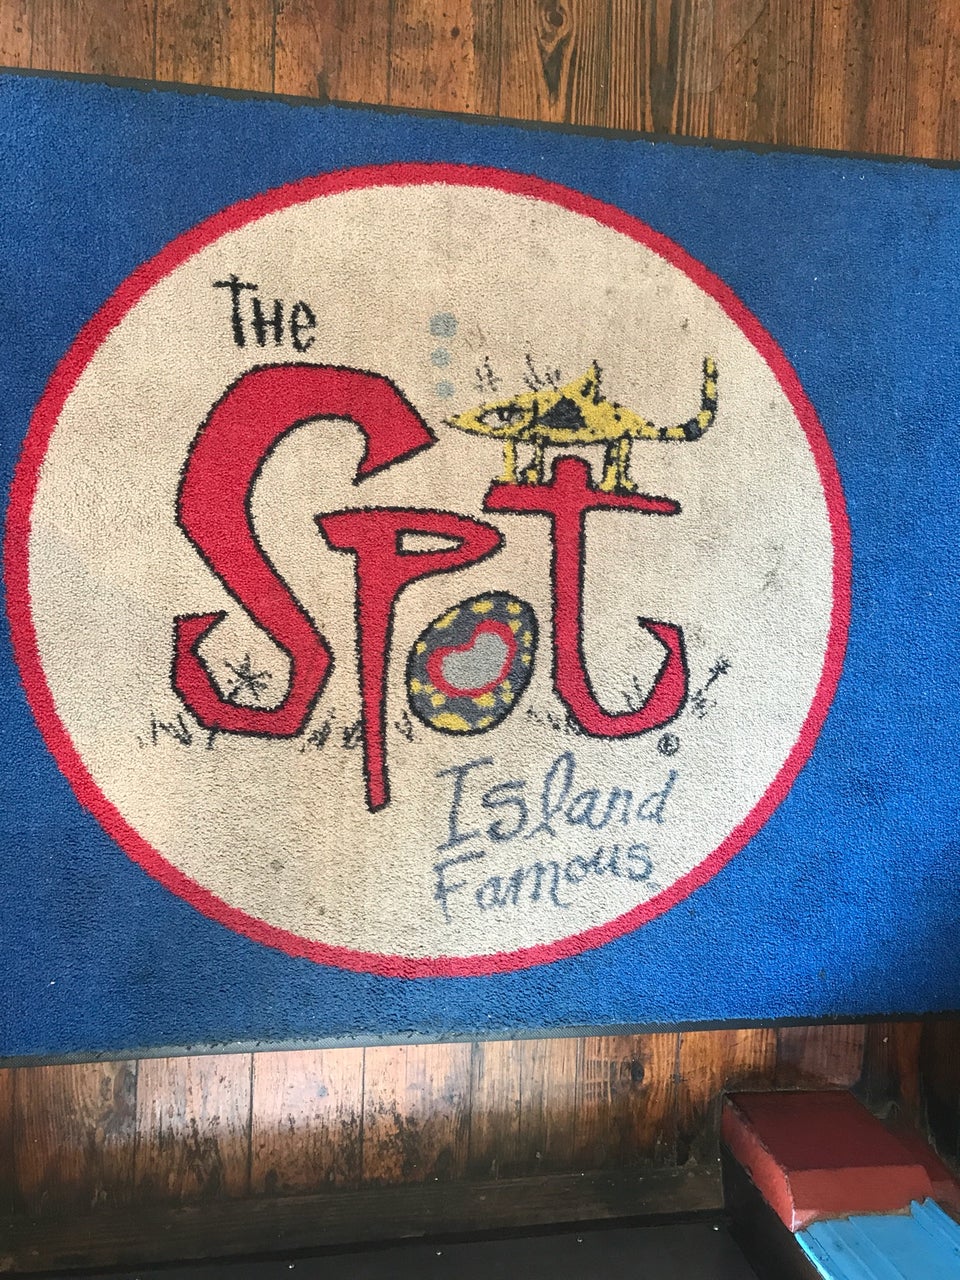 The Spot, Island Famous